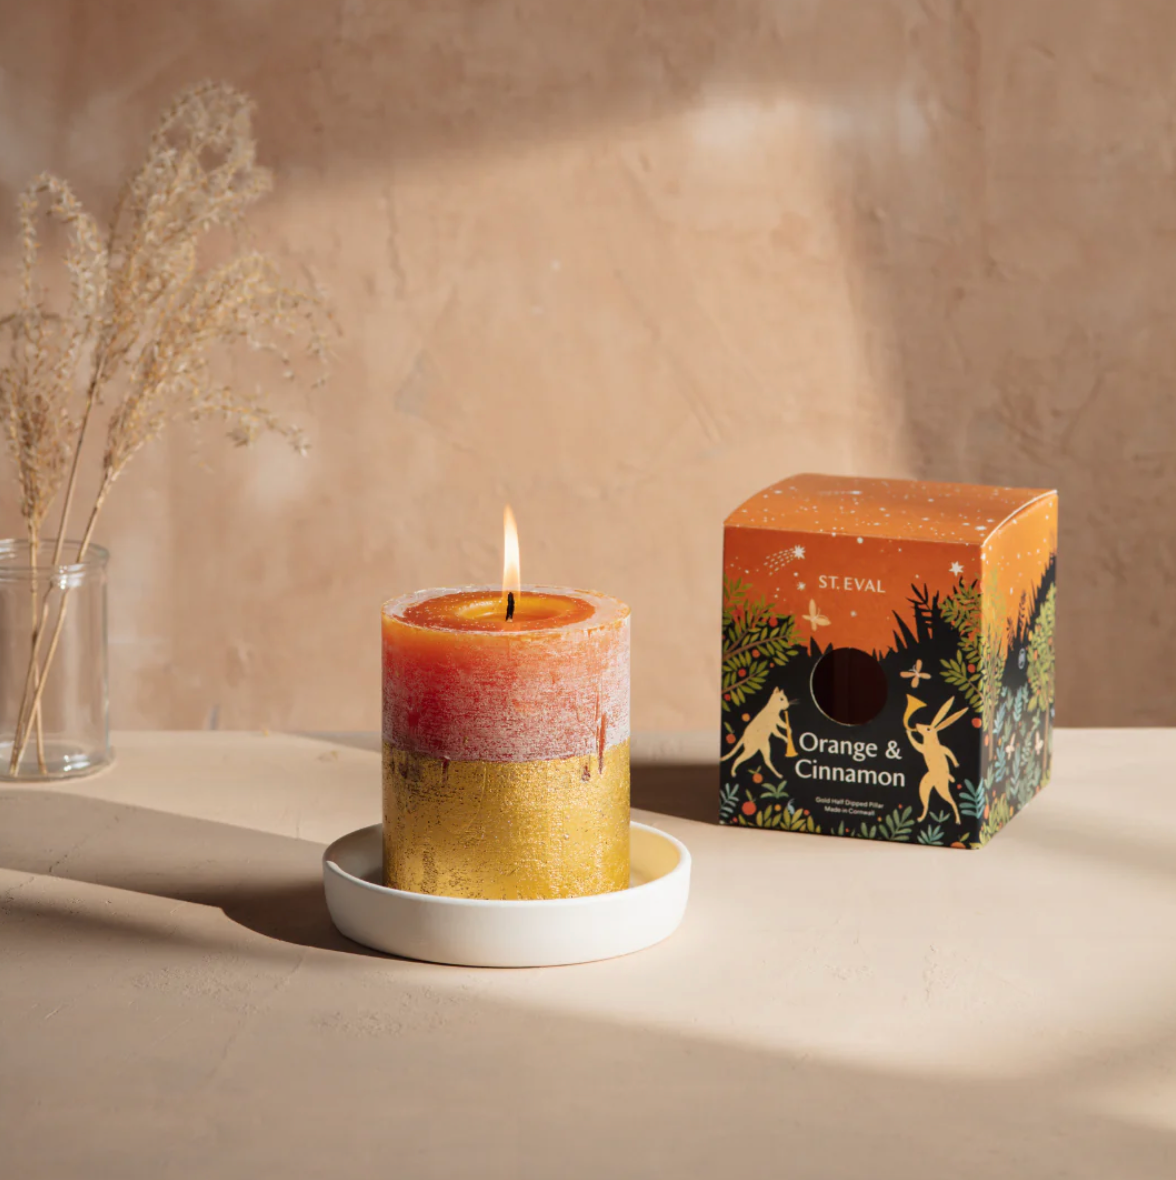 St Eval Gold Dipped Scented Pillar Candle, Orange & Cinnamon